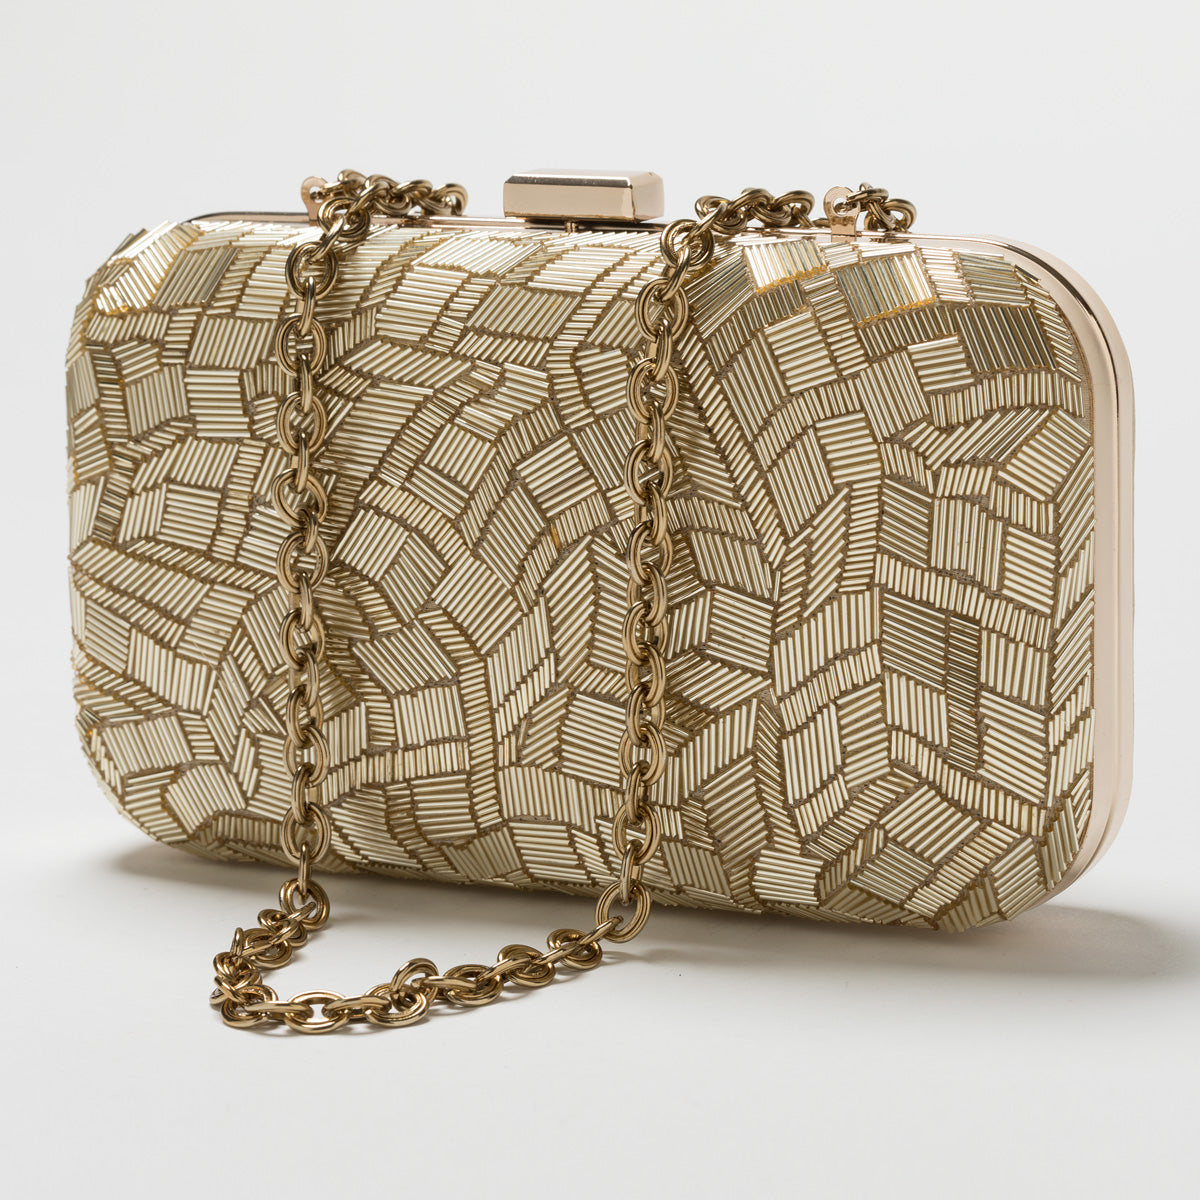 Lori Weitzner Saule Clutch, Bag with Beading and Hidden Chain